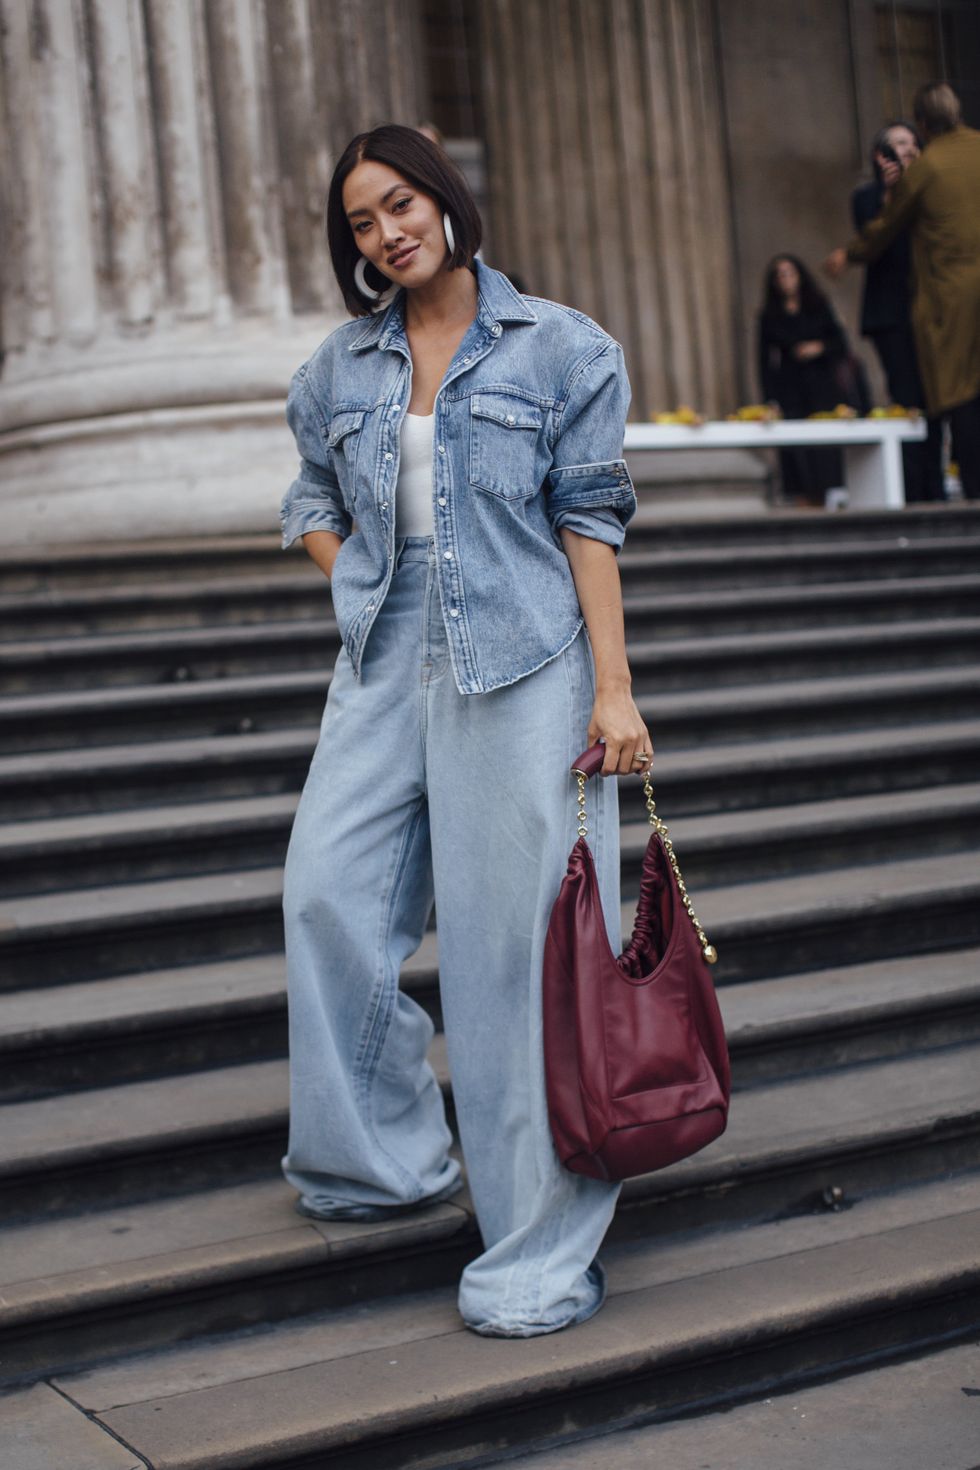 7 Denim Trends of 2023, According to Experts